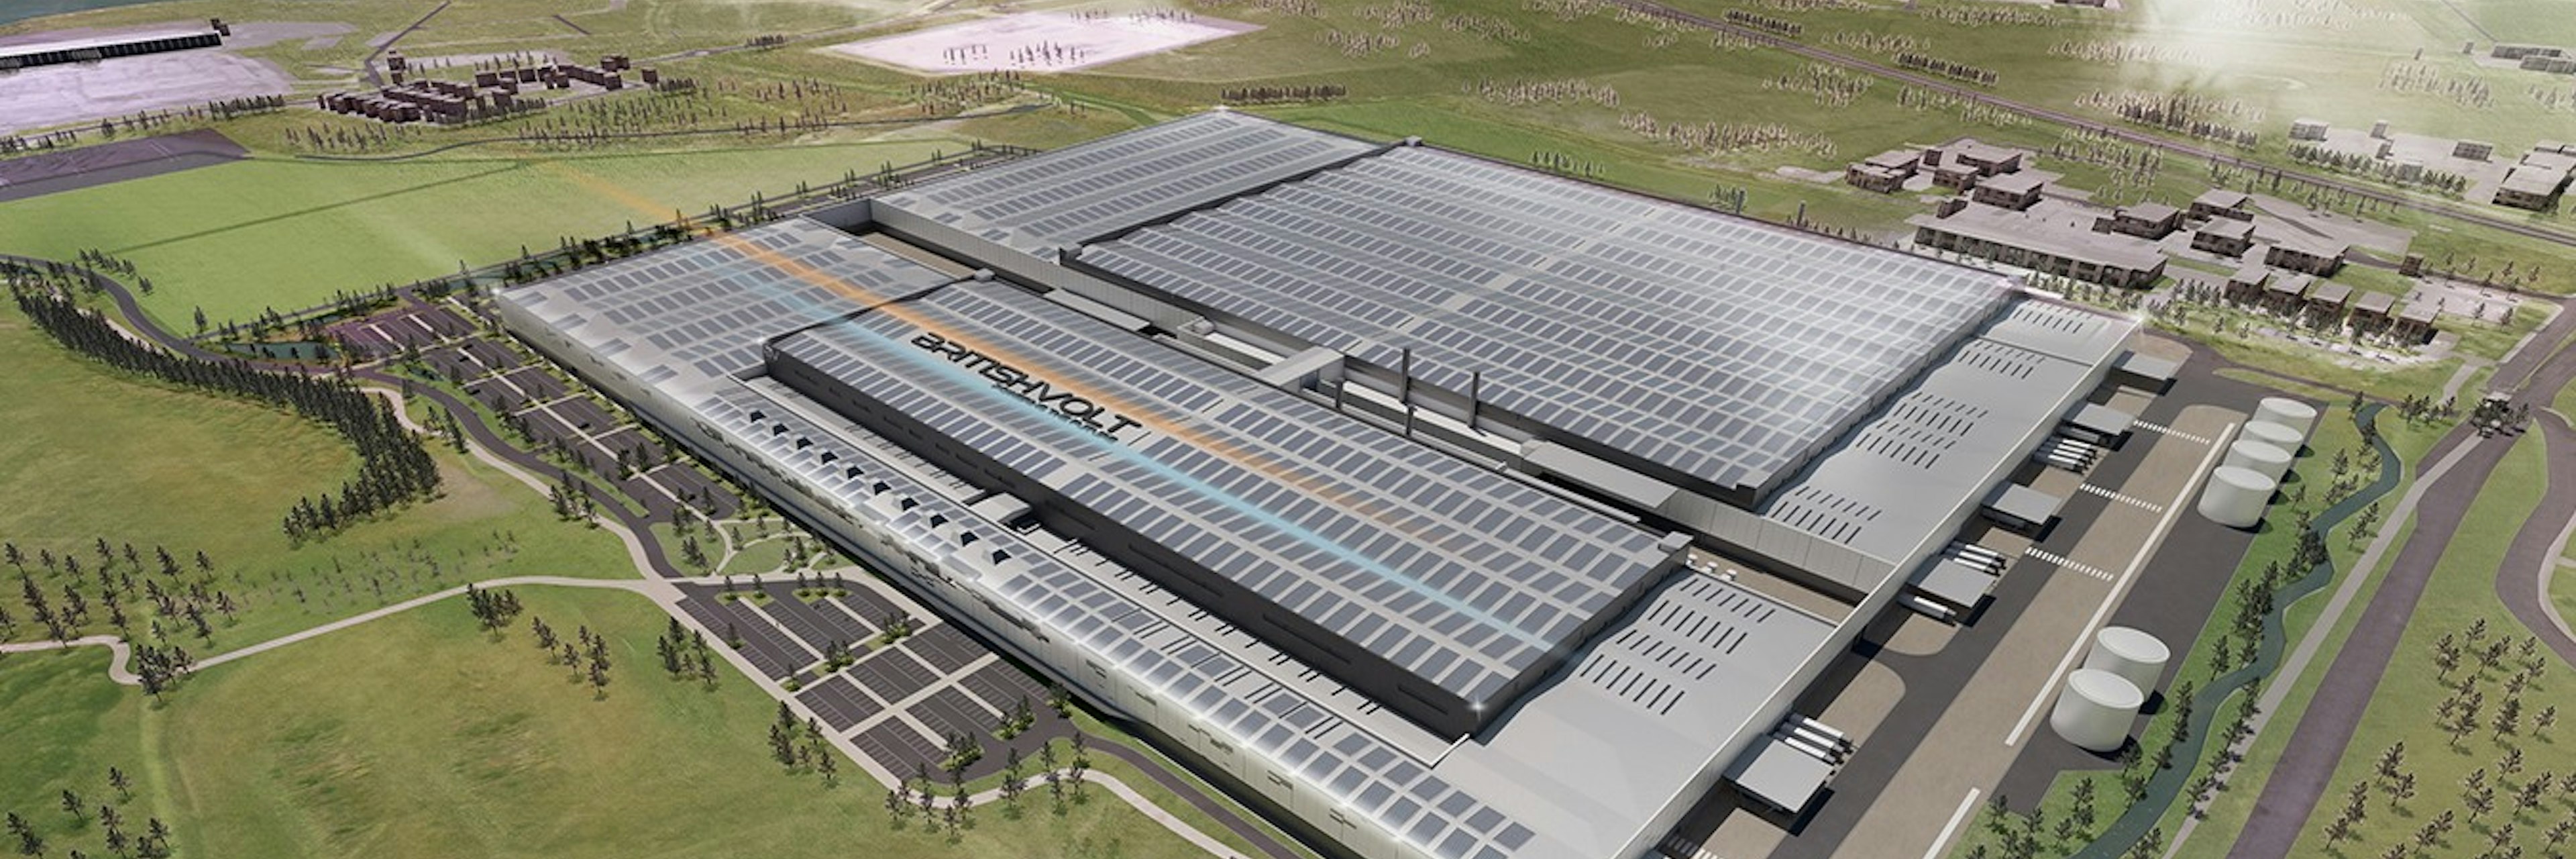 A rendering of what Britishvolt's gigafactory would look like completed